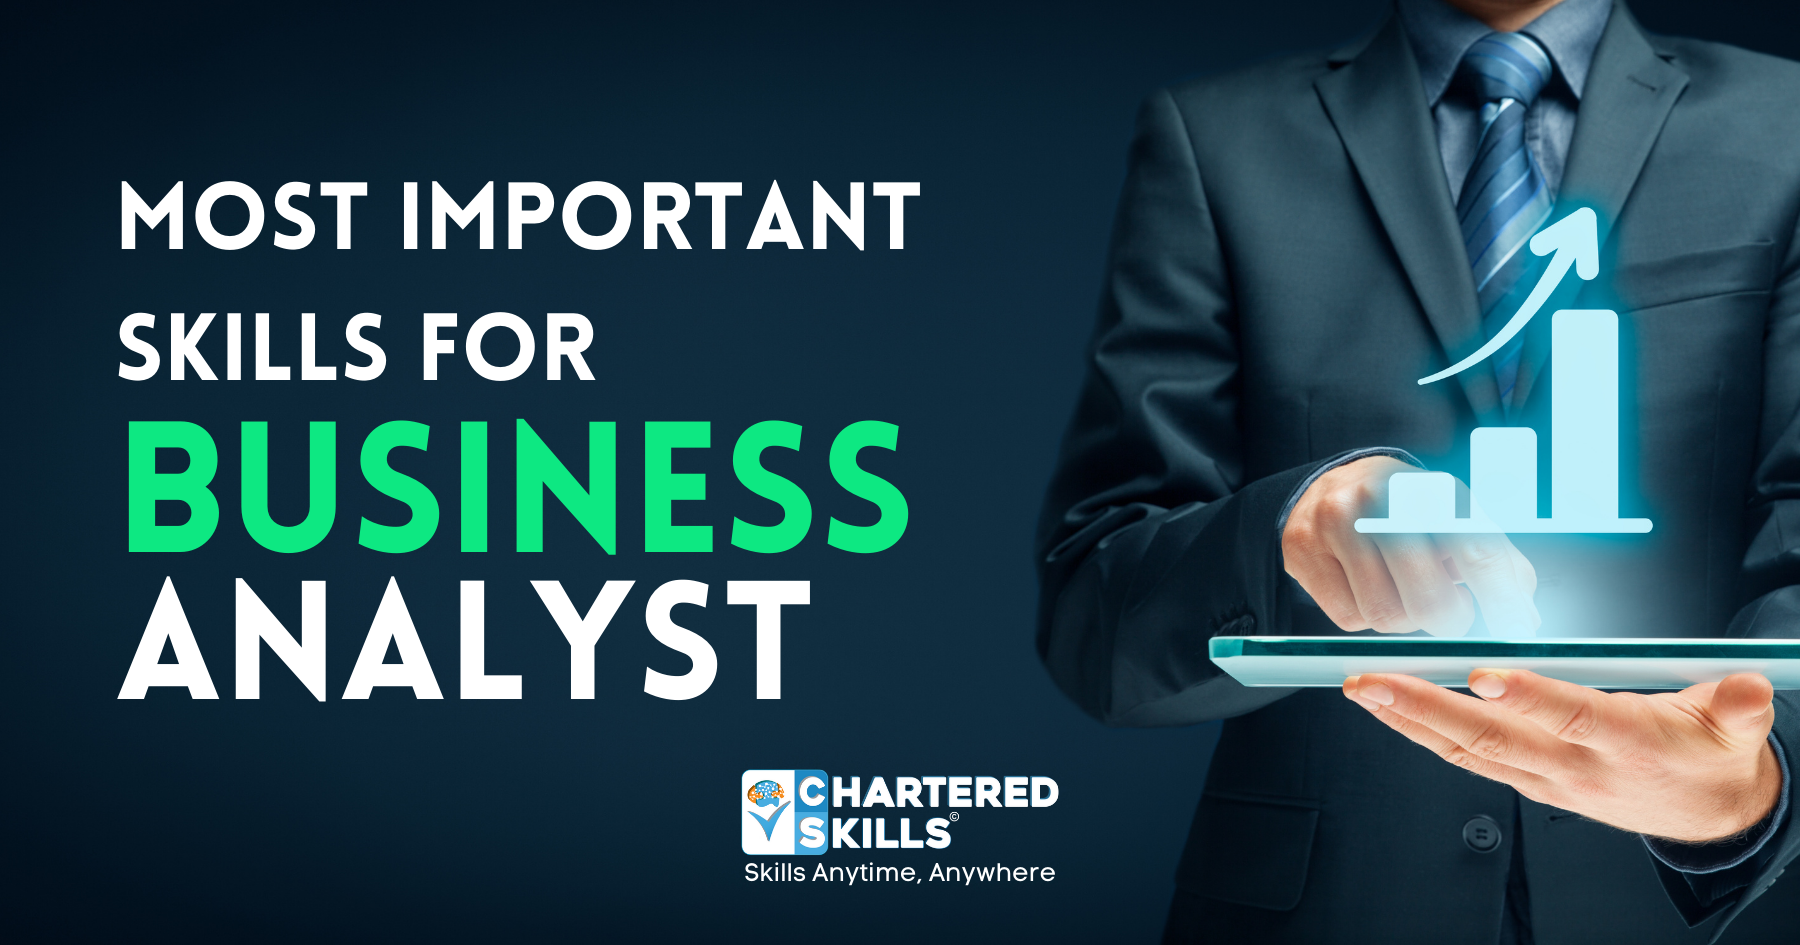 Most important skills for Business Analyst